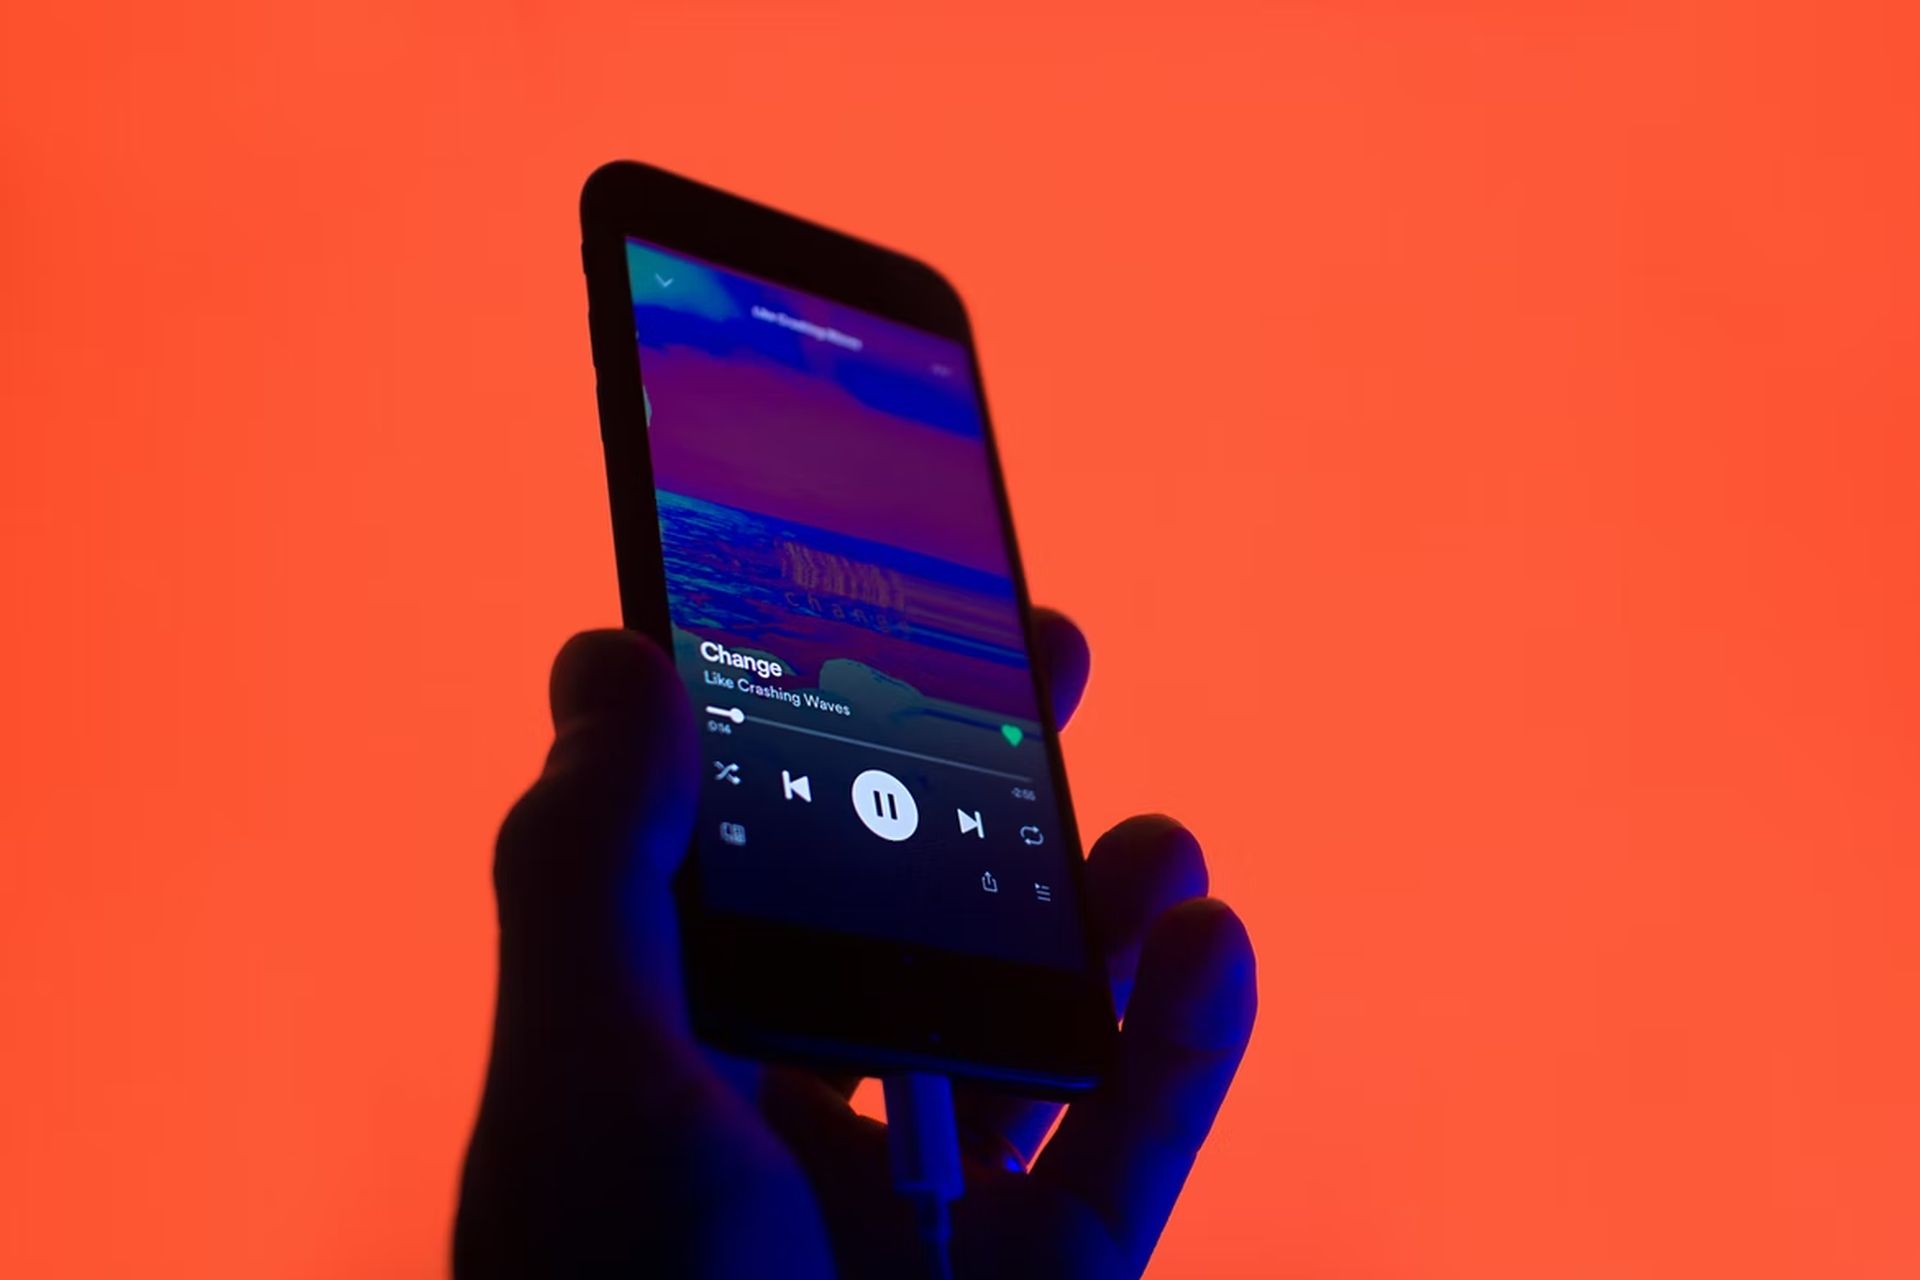 In today's article, we explain what is the Spotify timer, for how long you can set it up, and how to set it up for music and podcasts.